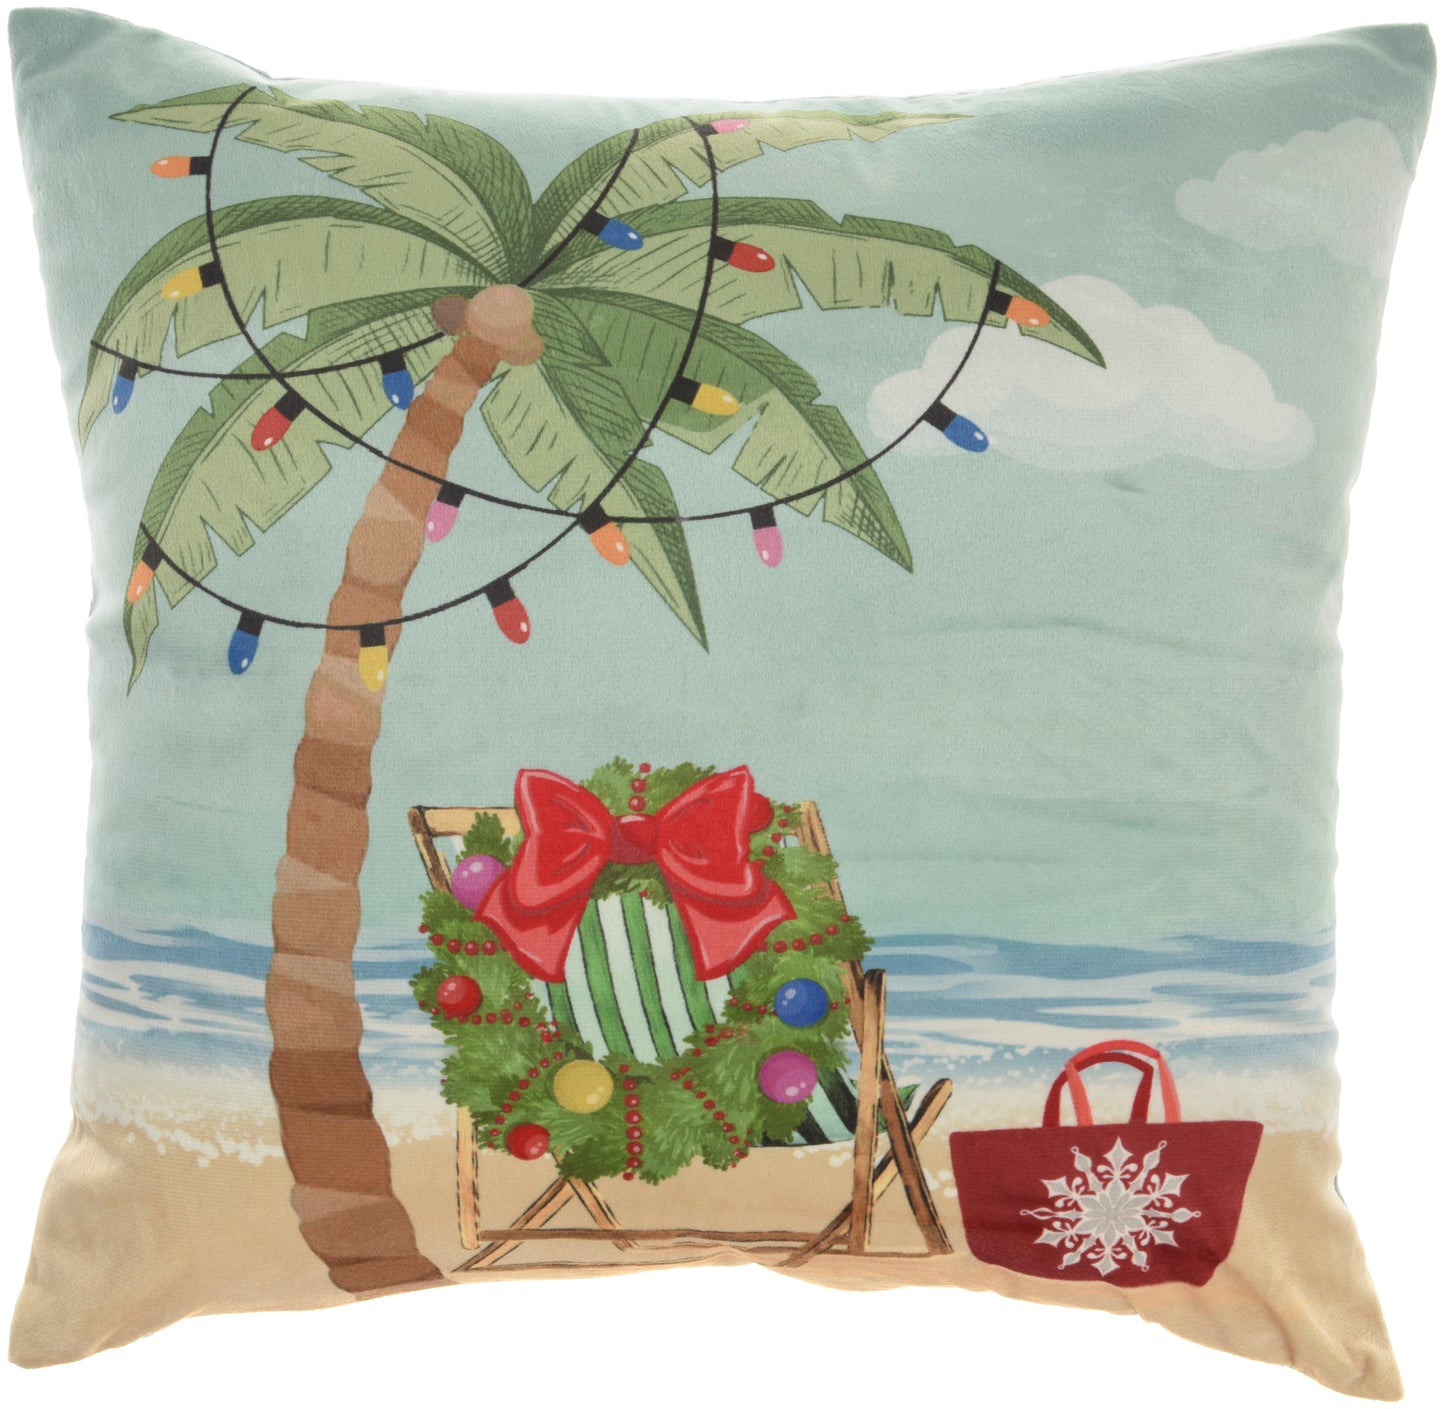 Holiday Pillows L0319 Synthetic Blend Light Up Beach Throw Pillow From Mina Victory By Nourison Rugs